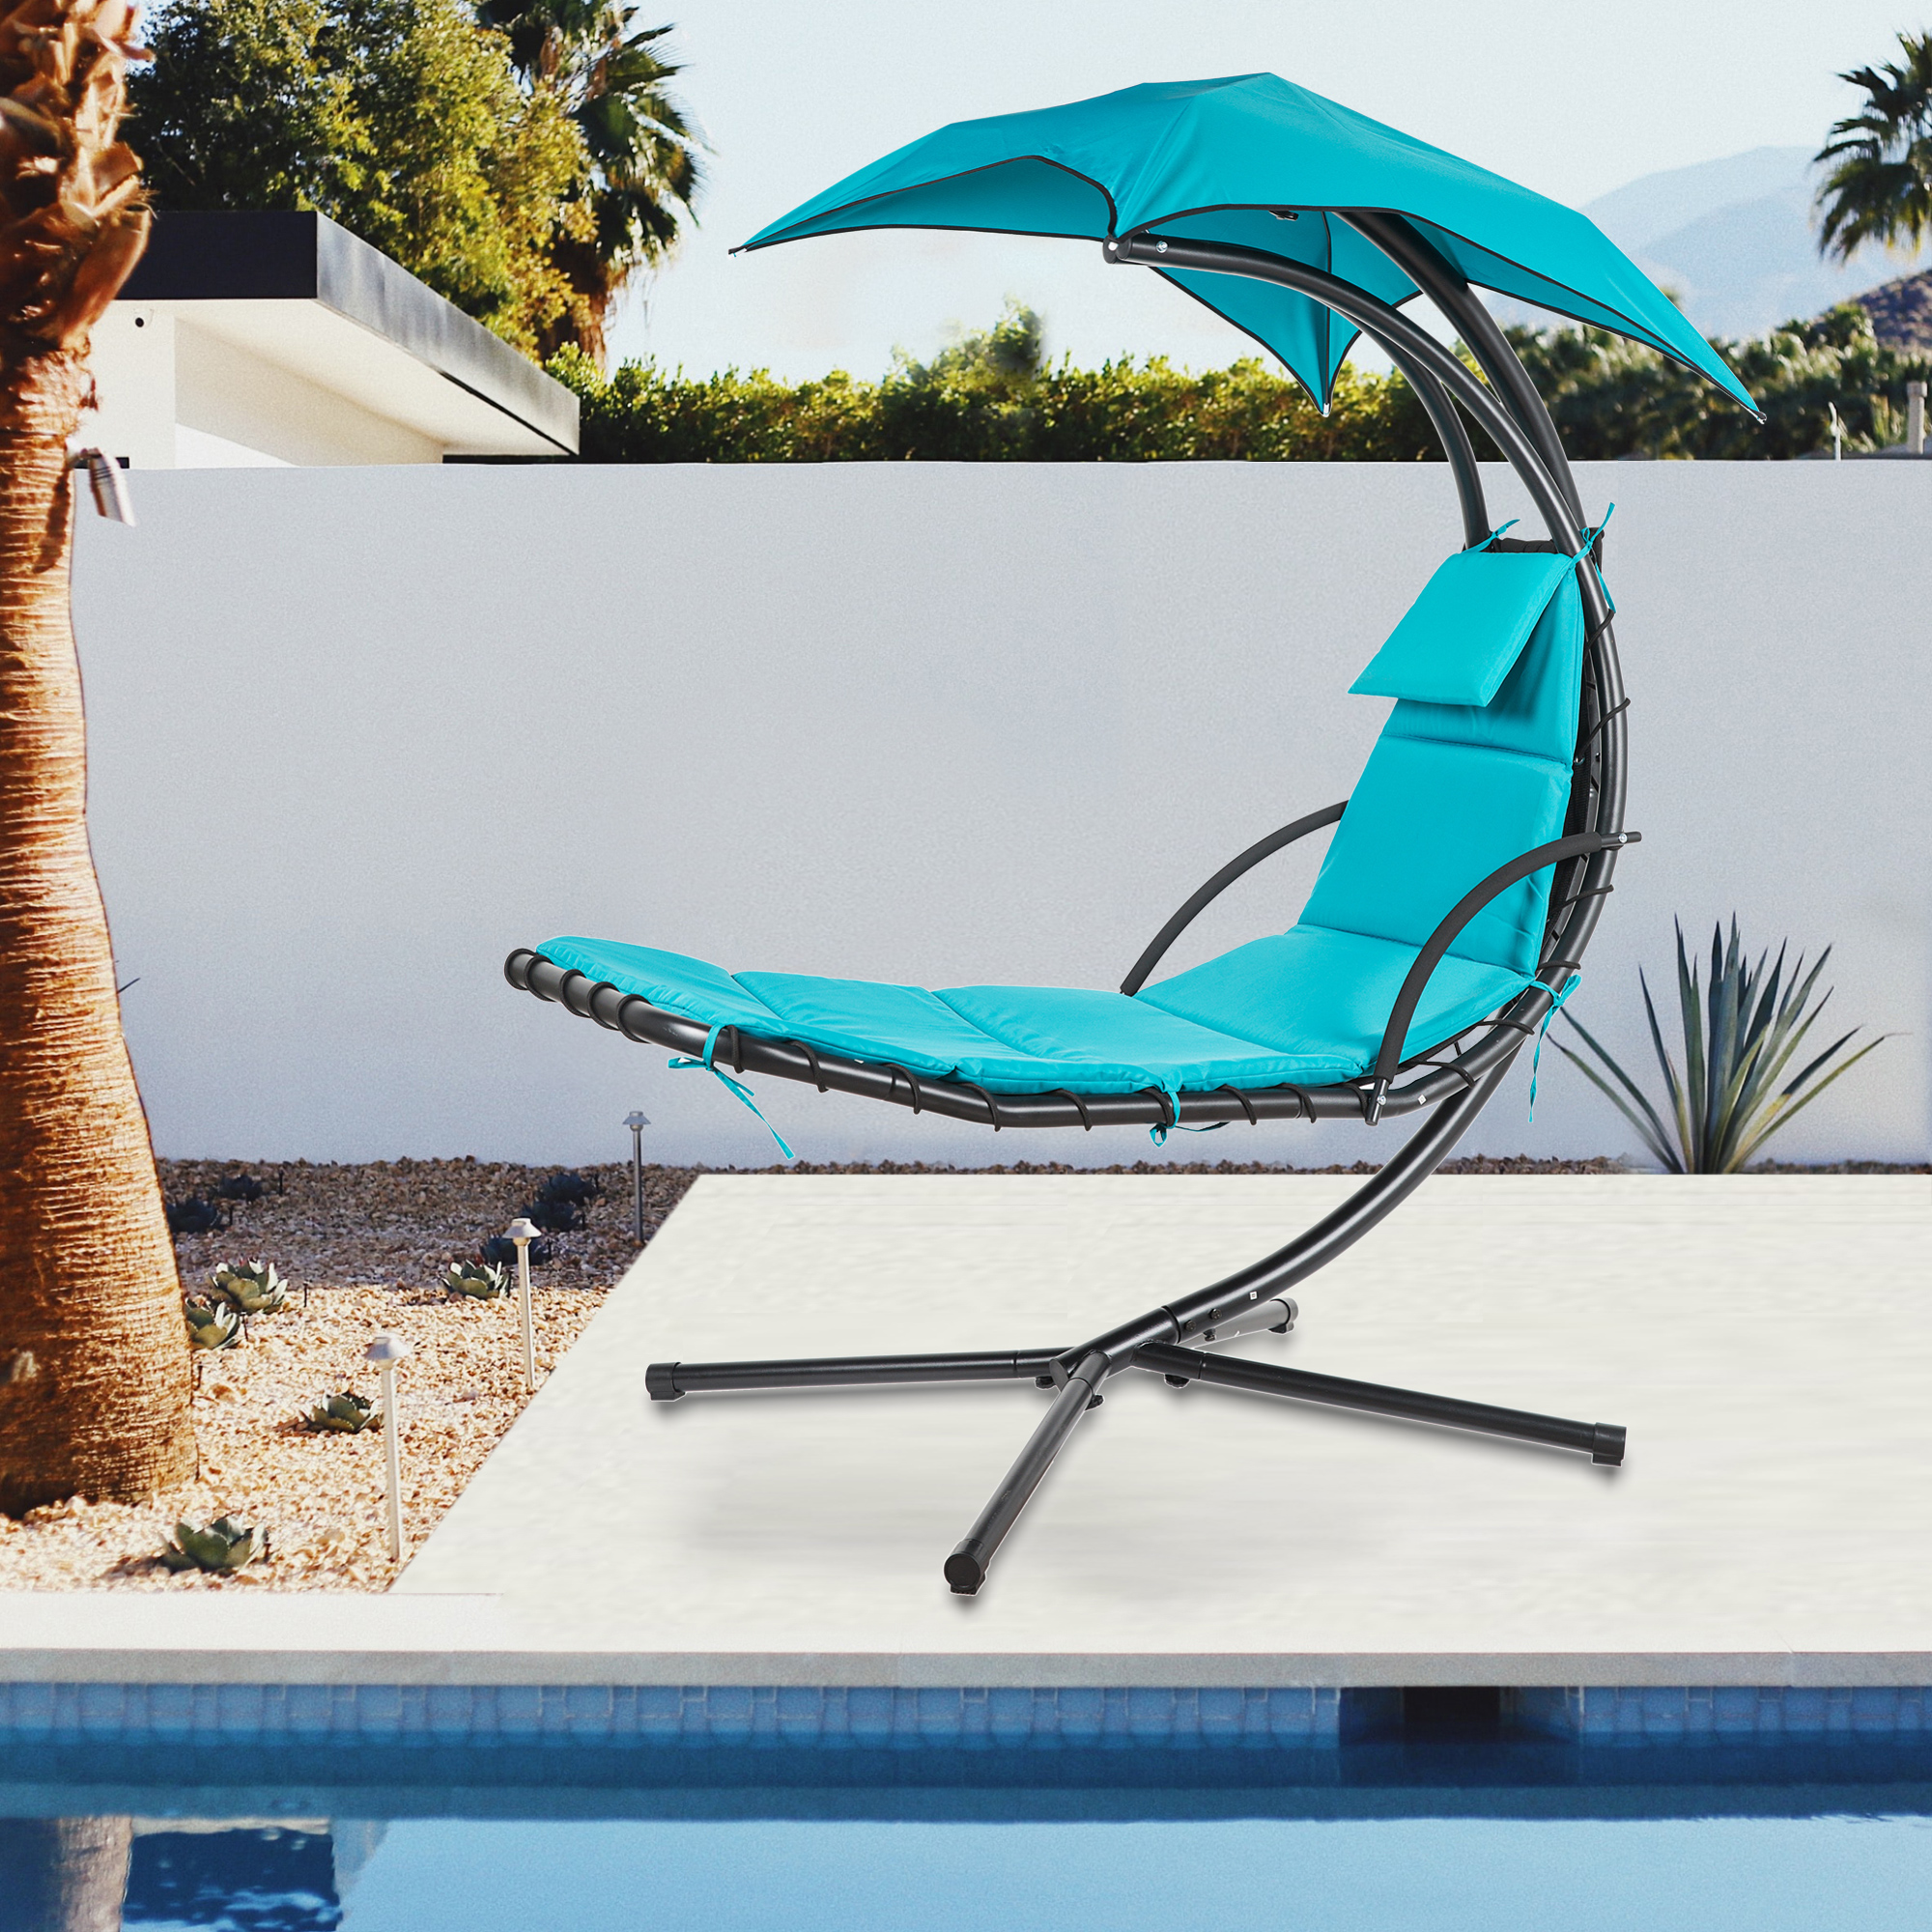 Finefind Hanging Chaise Lounge Chair Floating Swing Hammock Chair Steel Patio, Blue - image 4 of 7